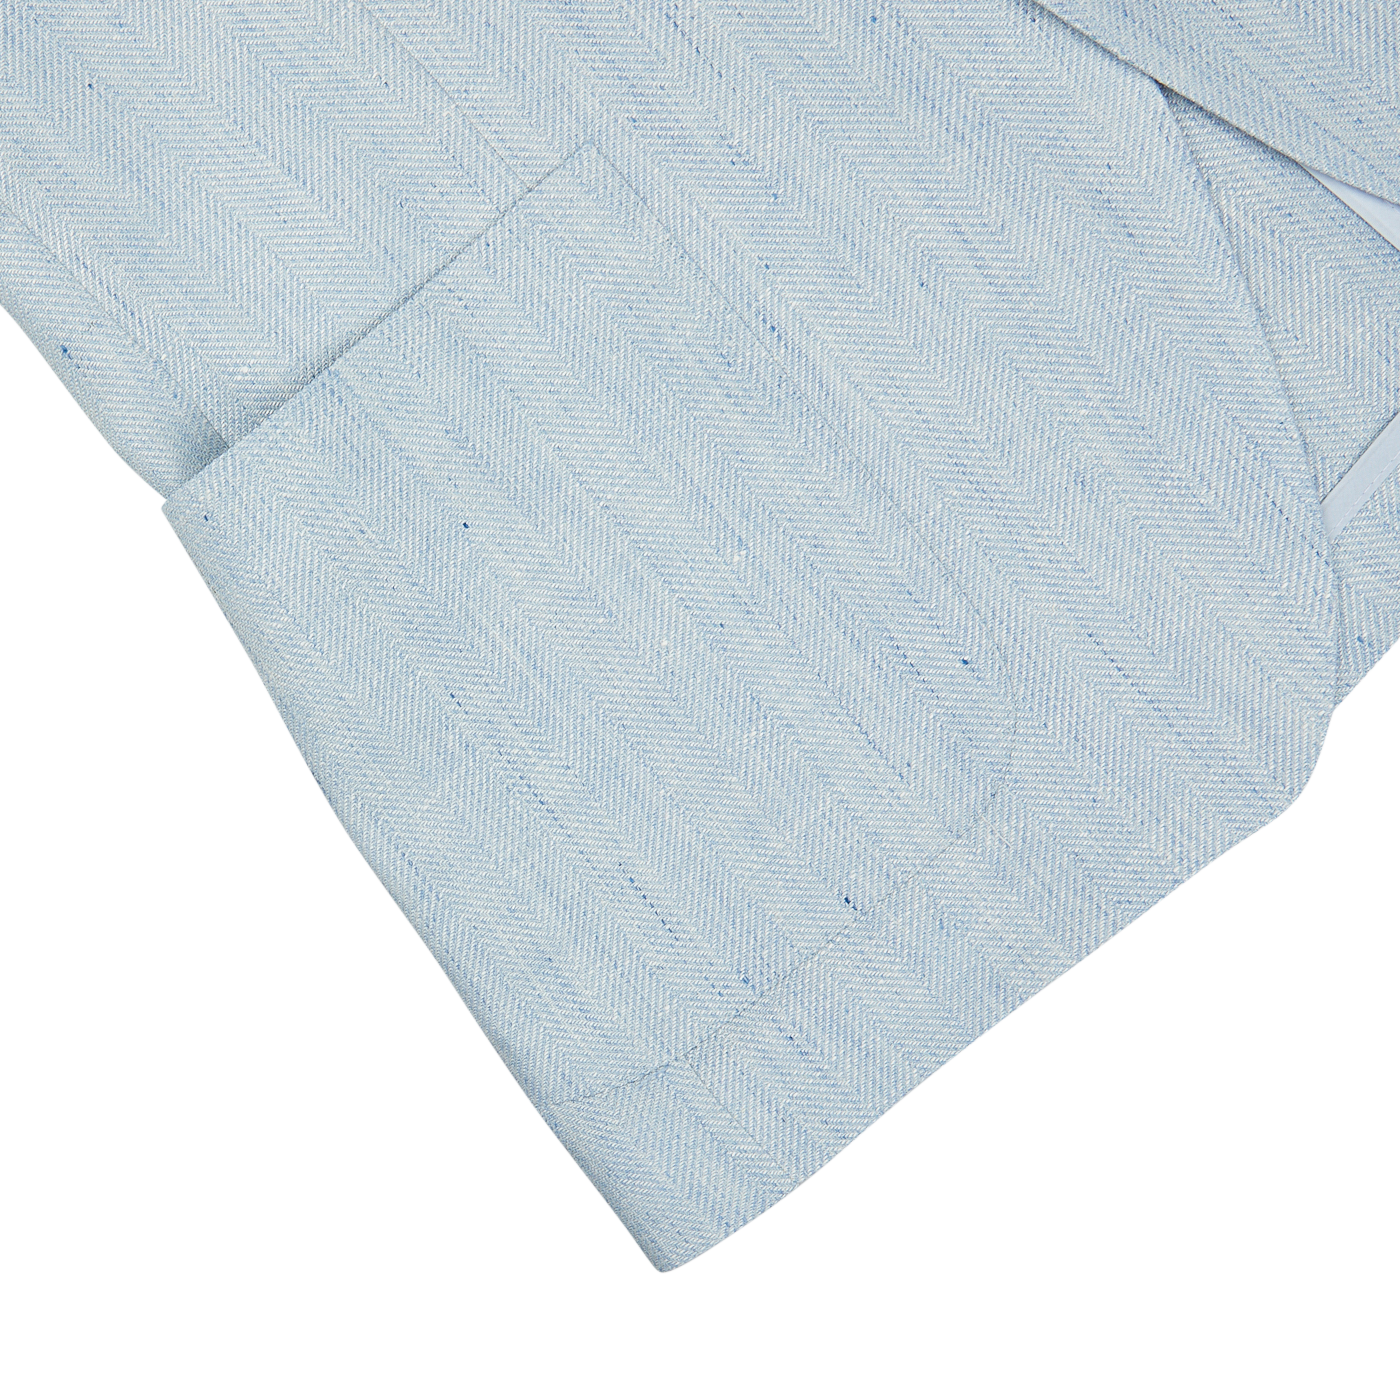 Light blue textured linen-wool blend tie on a white background from Tagliatore.